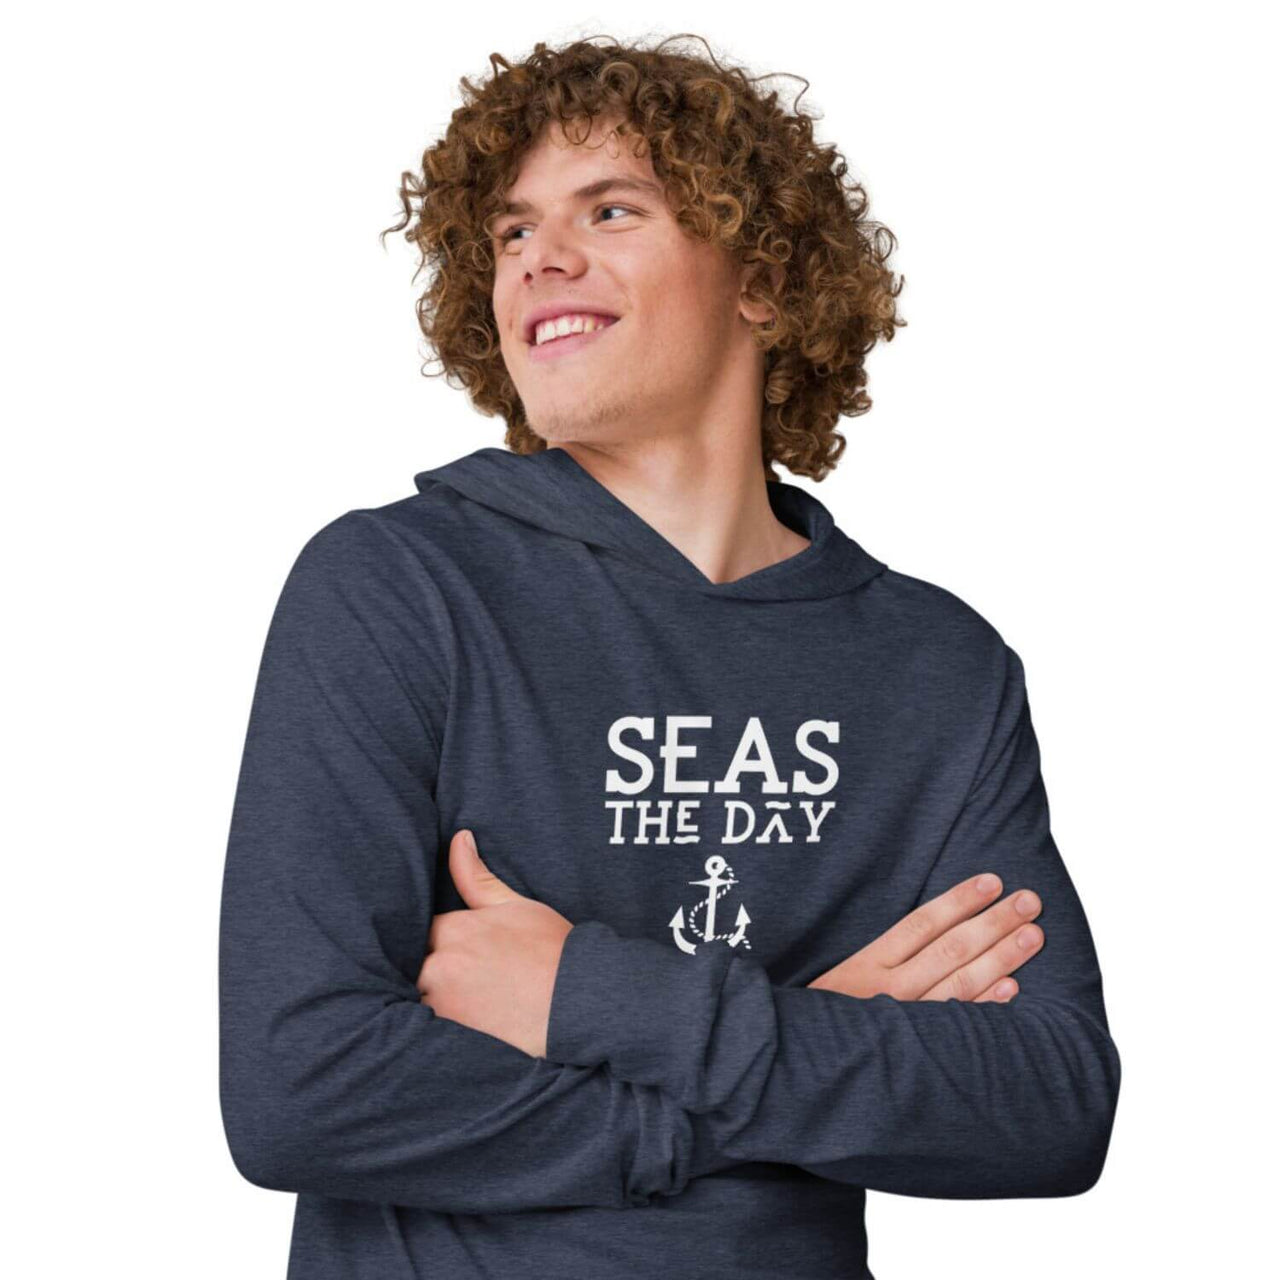 Seas the Day Hooded Long Sleeve Tee, Unisex, Close Up